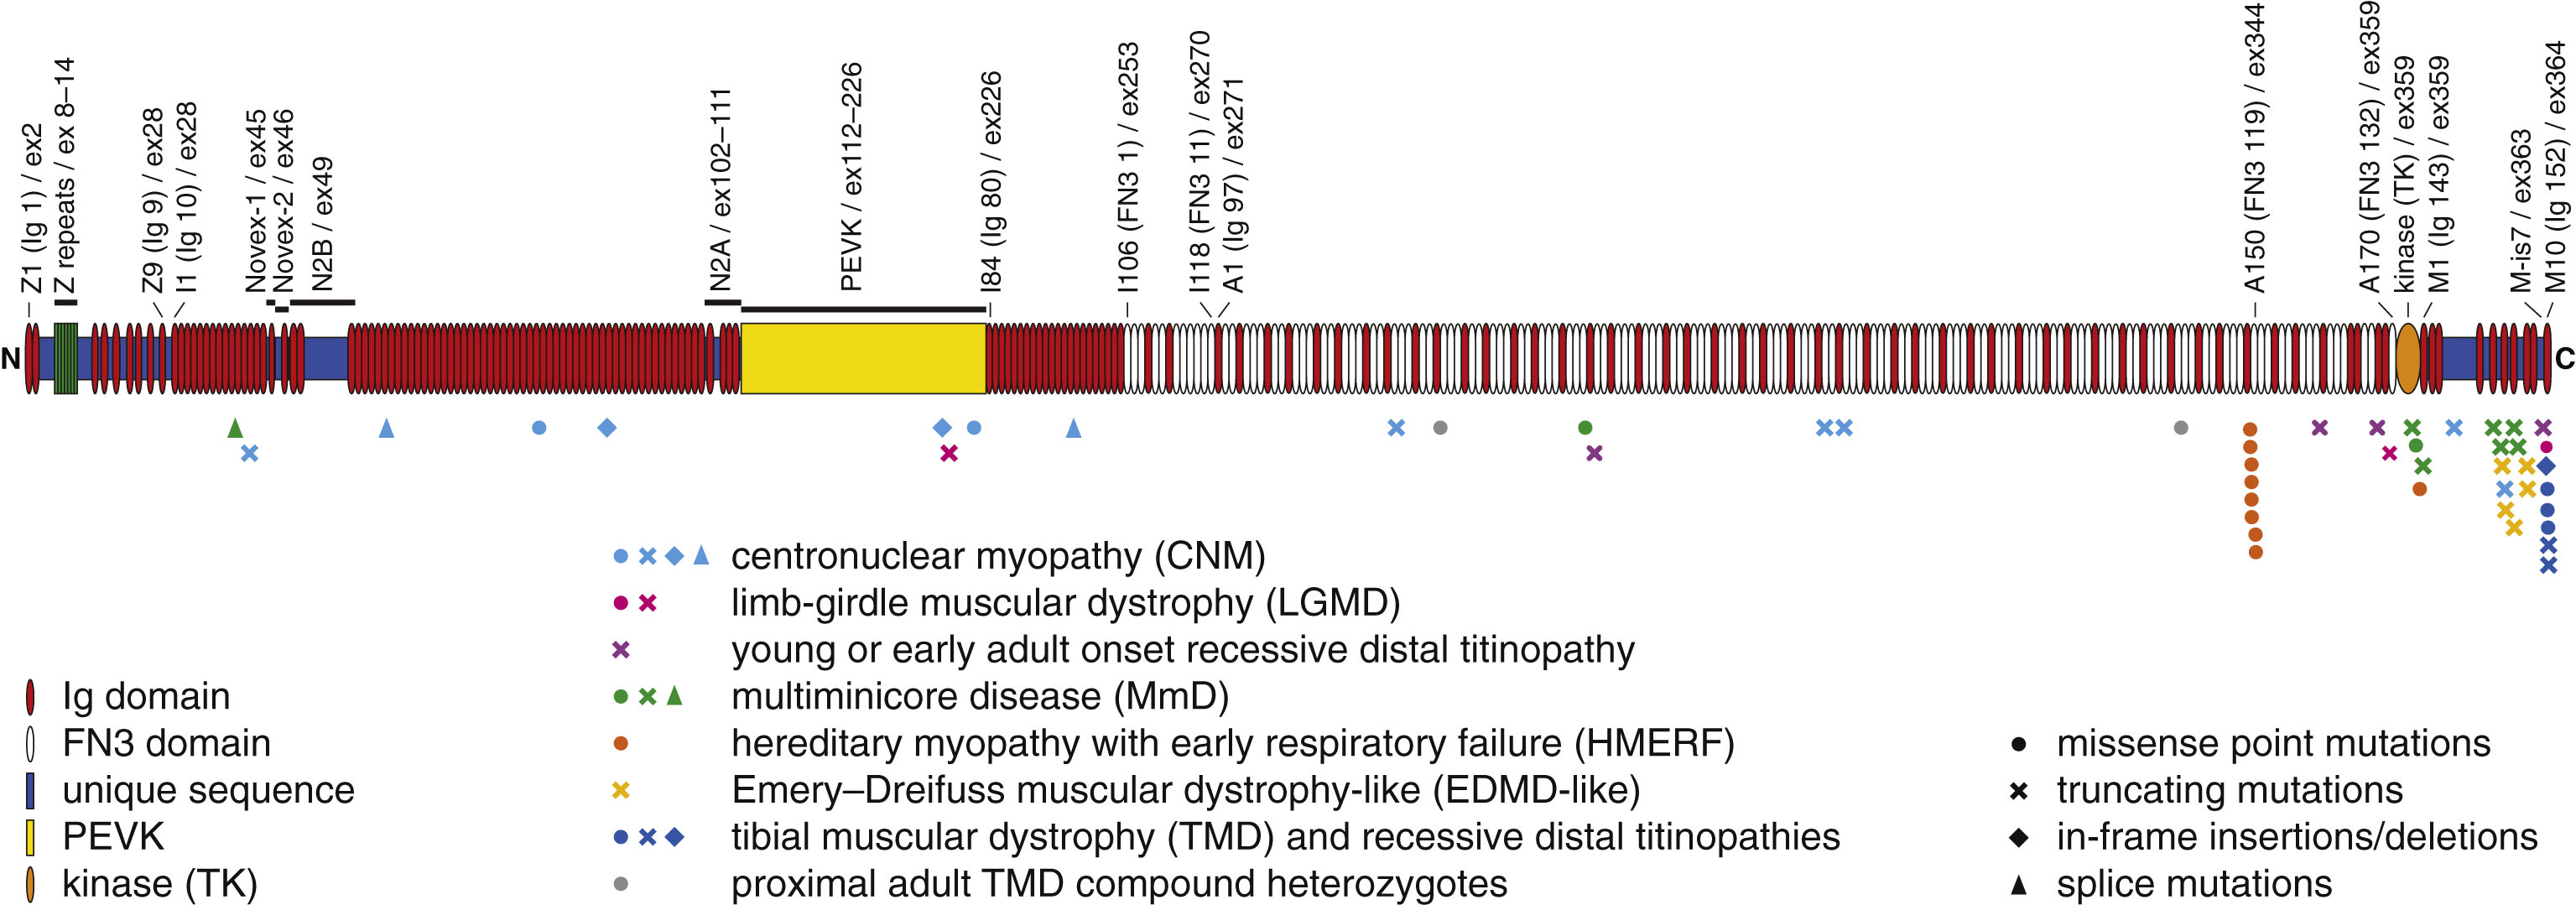 Skeletal muscle disease mutations in titin. Symbols below the diagram depict mutations associated with neuromuscular diseases, with the symbol shape indicating mutation type and symbol color indicating the predominant clinical phenotype.